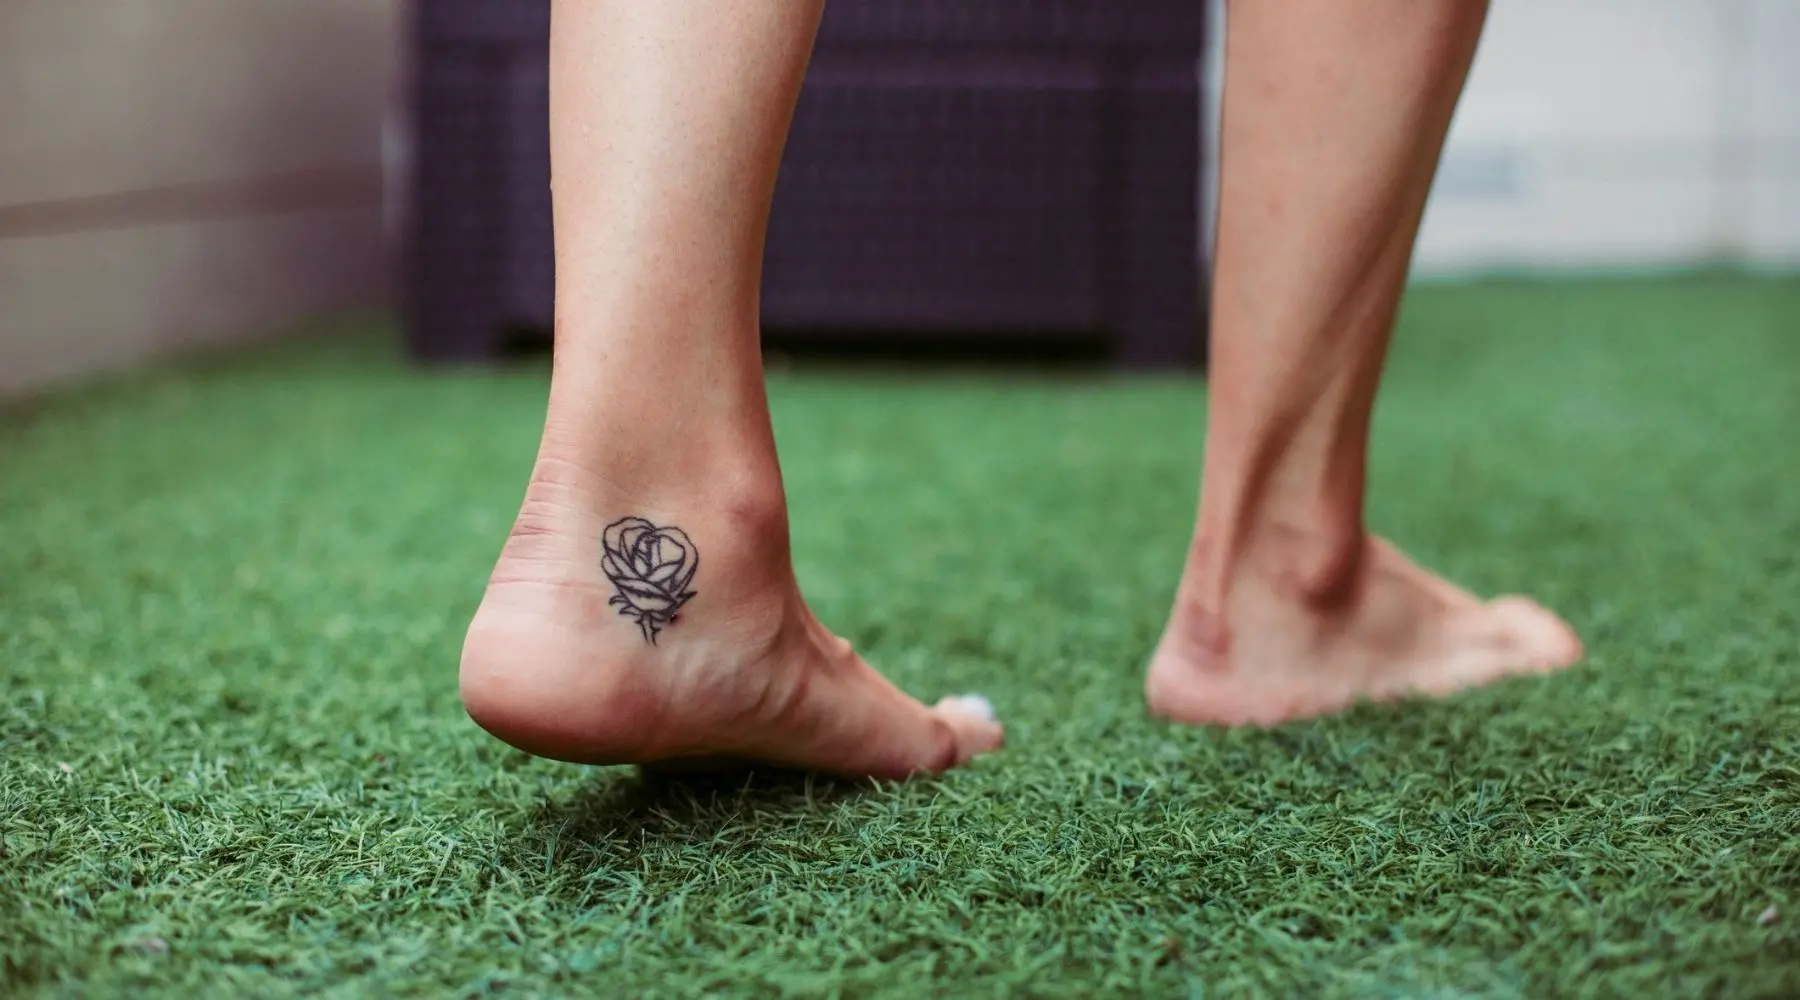 A woman with a tattoo of her rose on her foot walks on artificial grass.